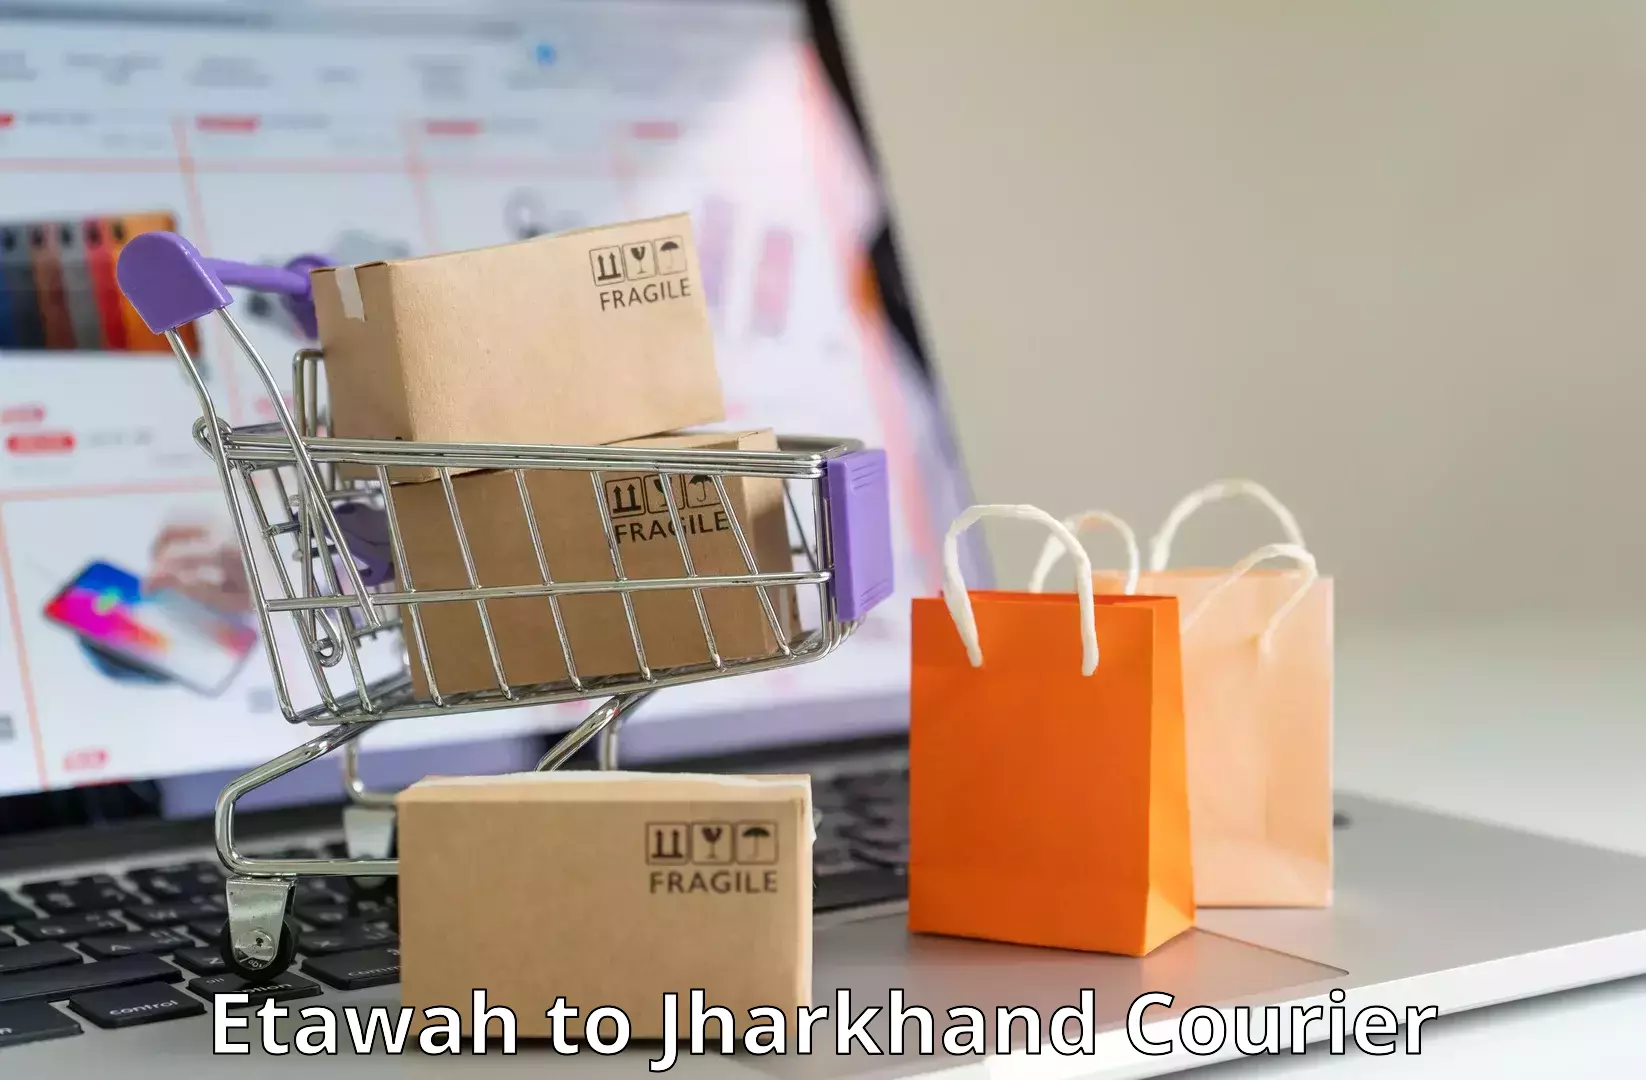 Full-service courier options Etawah to Jharkhand